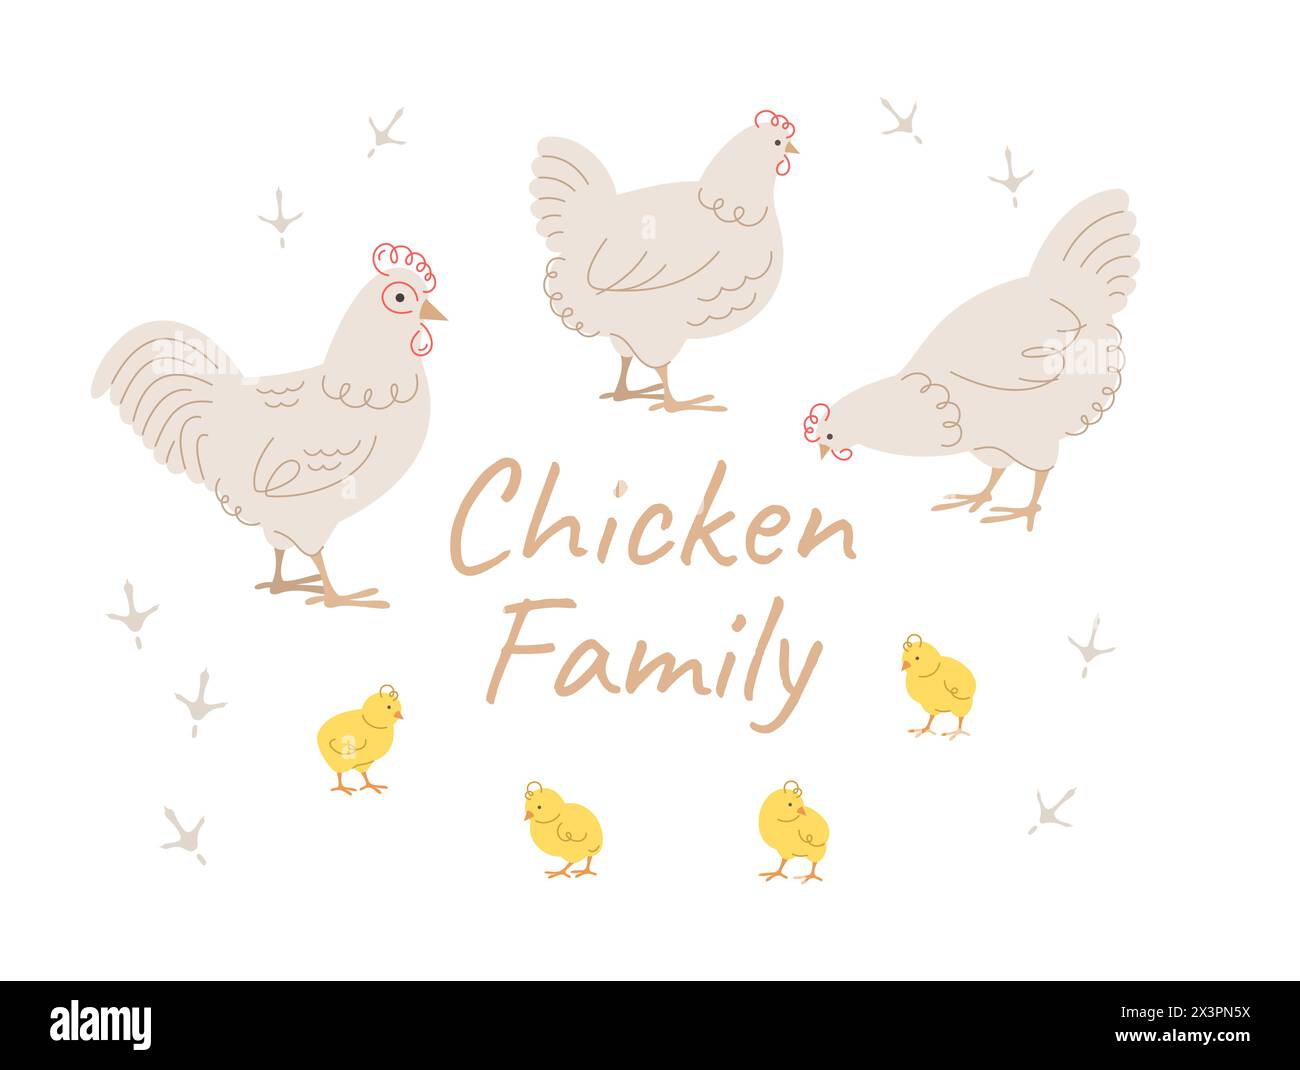 Cute doodle chicken family members. Hand drawn linear chicken, rooster and adorable chicks in different poses, isolated on white. Stylized vector cart Stock Vector